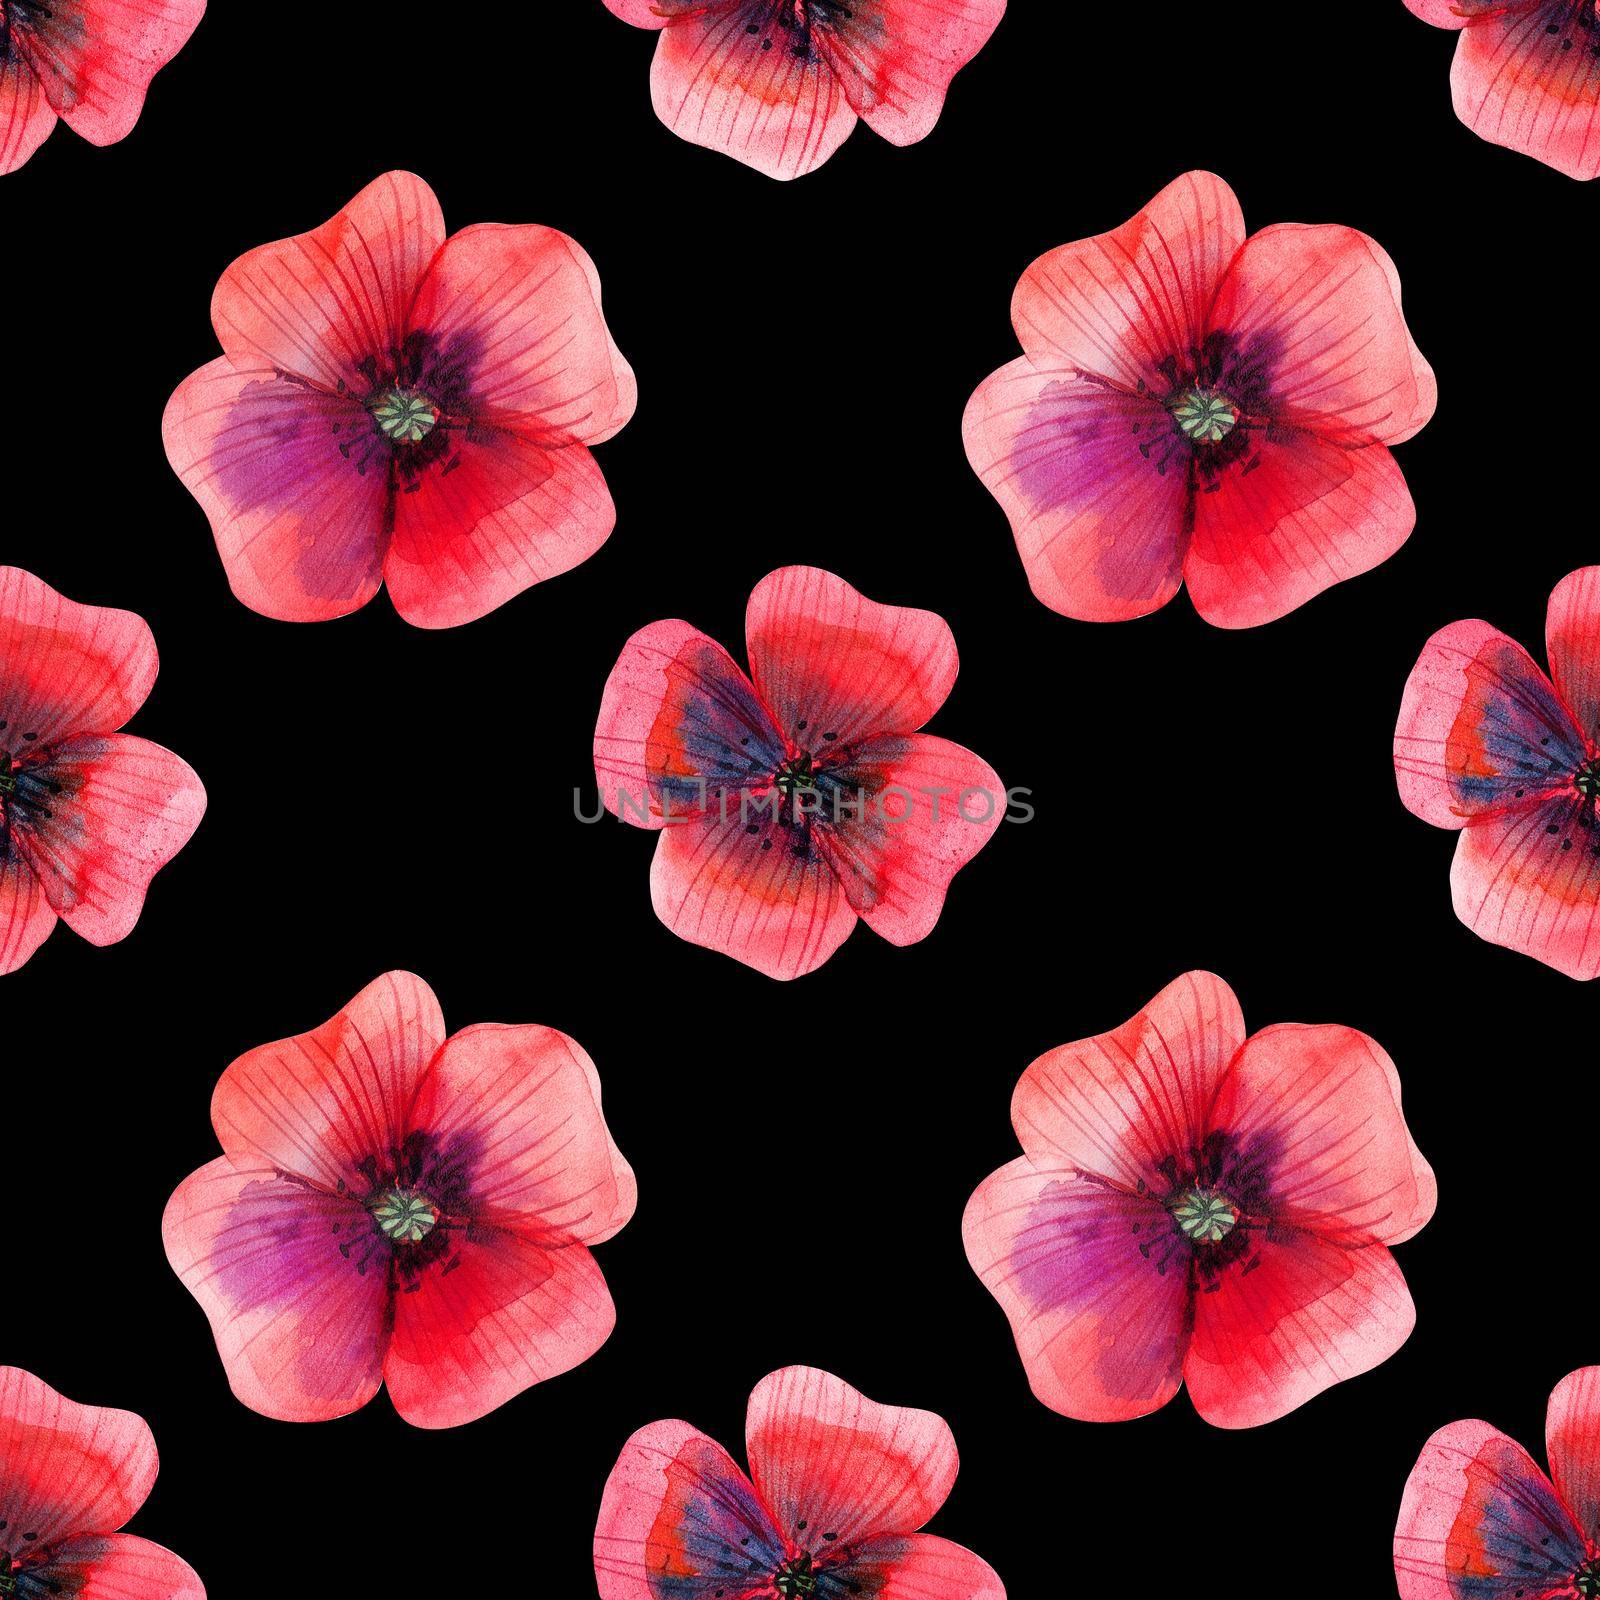 Decorative watercolor illustration. Red poppy flowers. Seamless pattern with included path